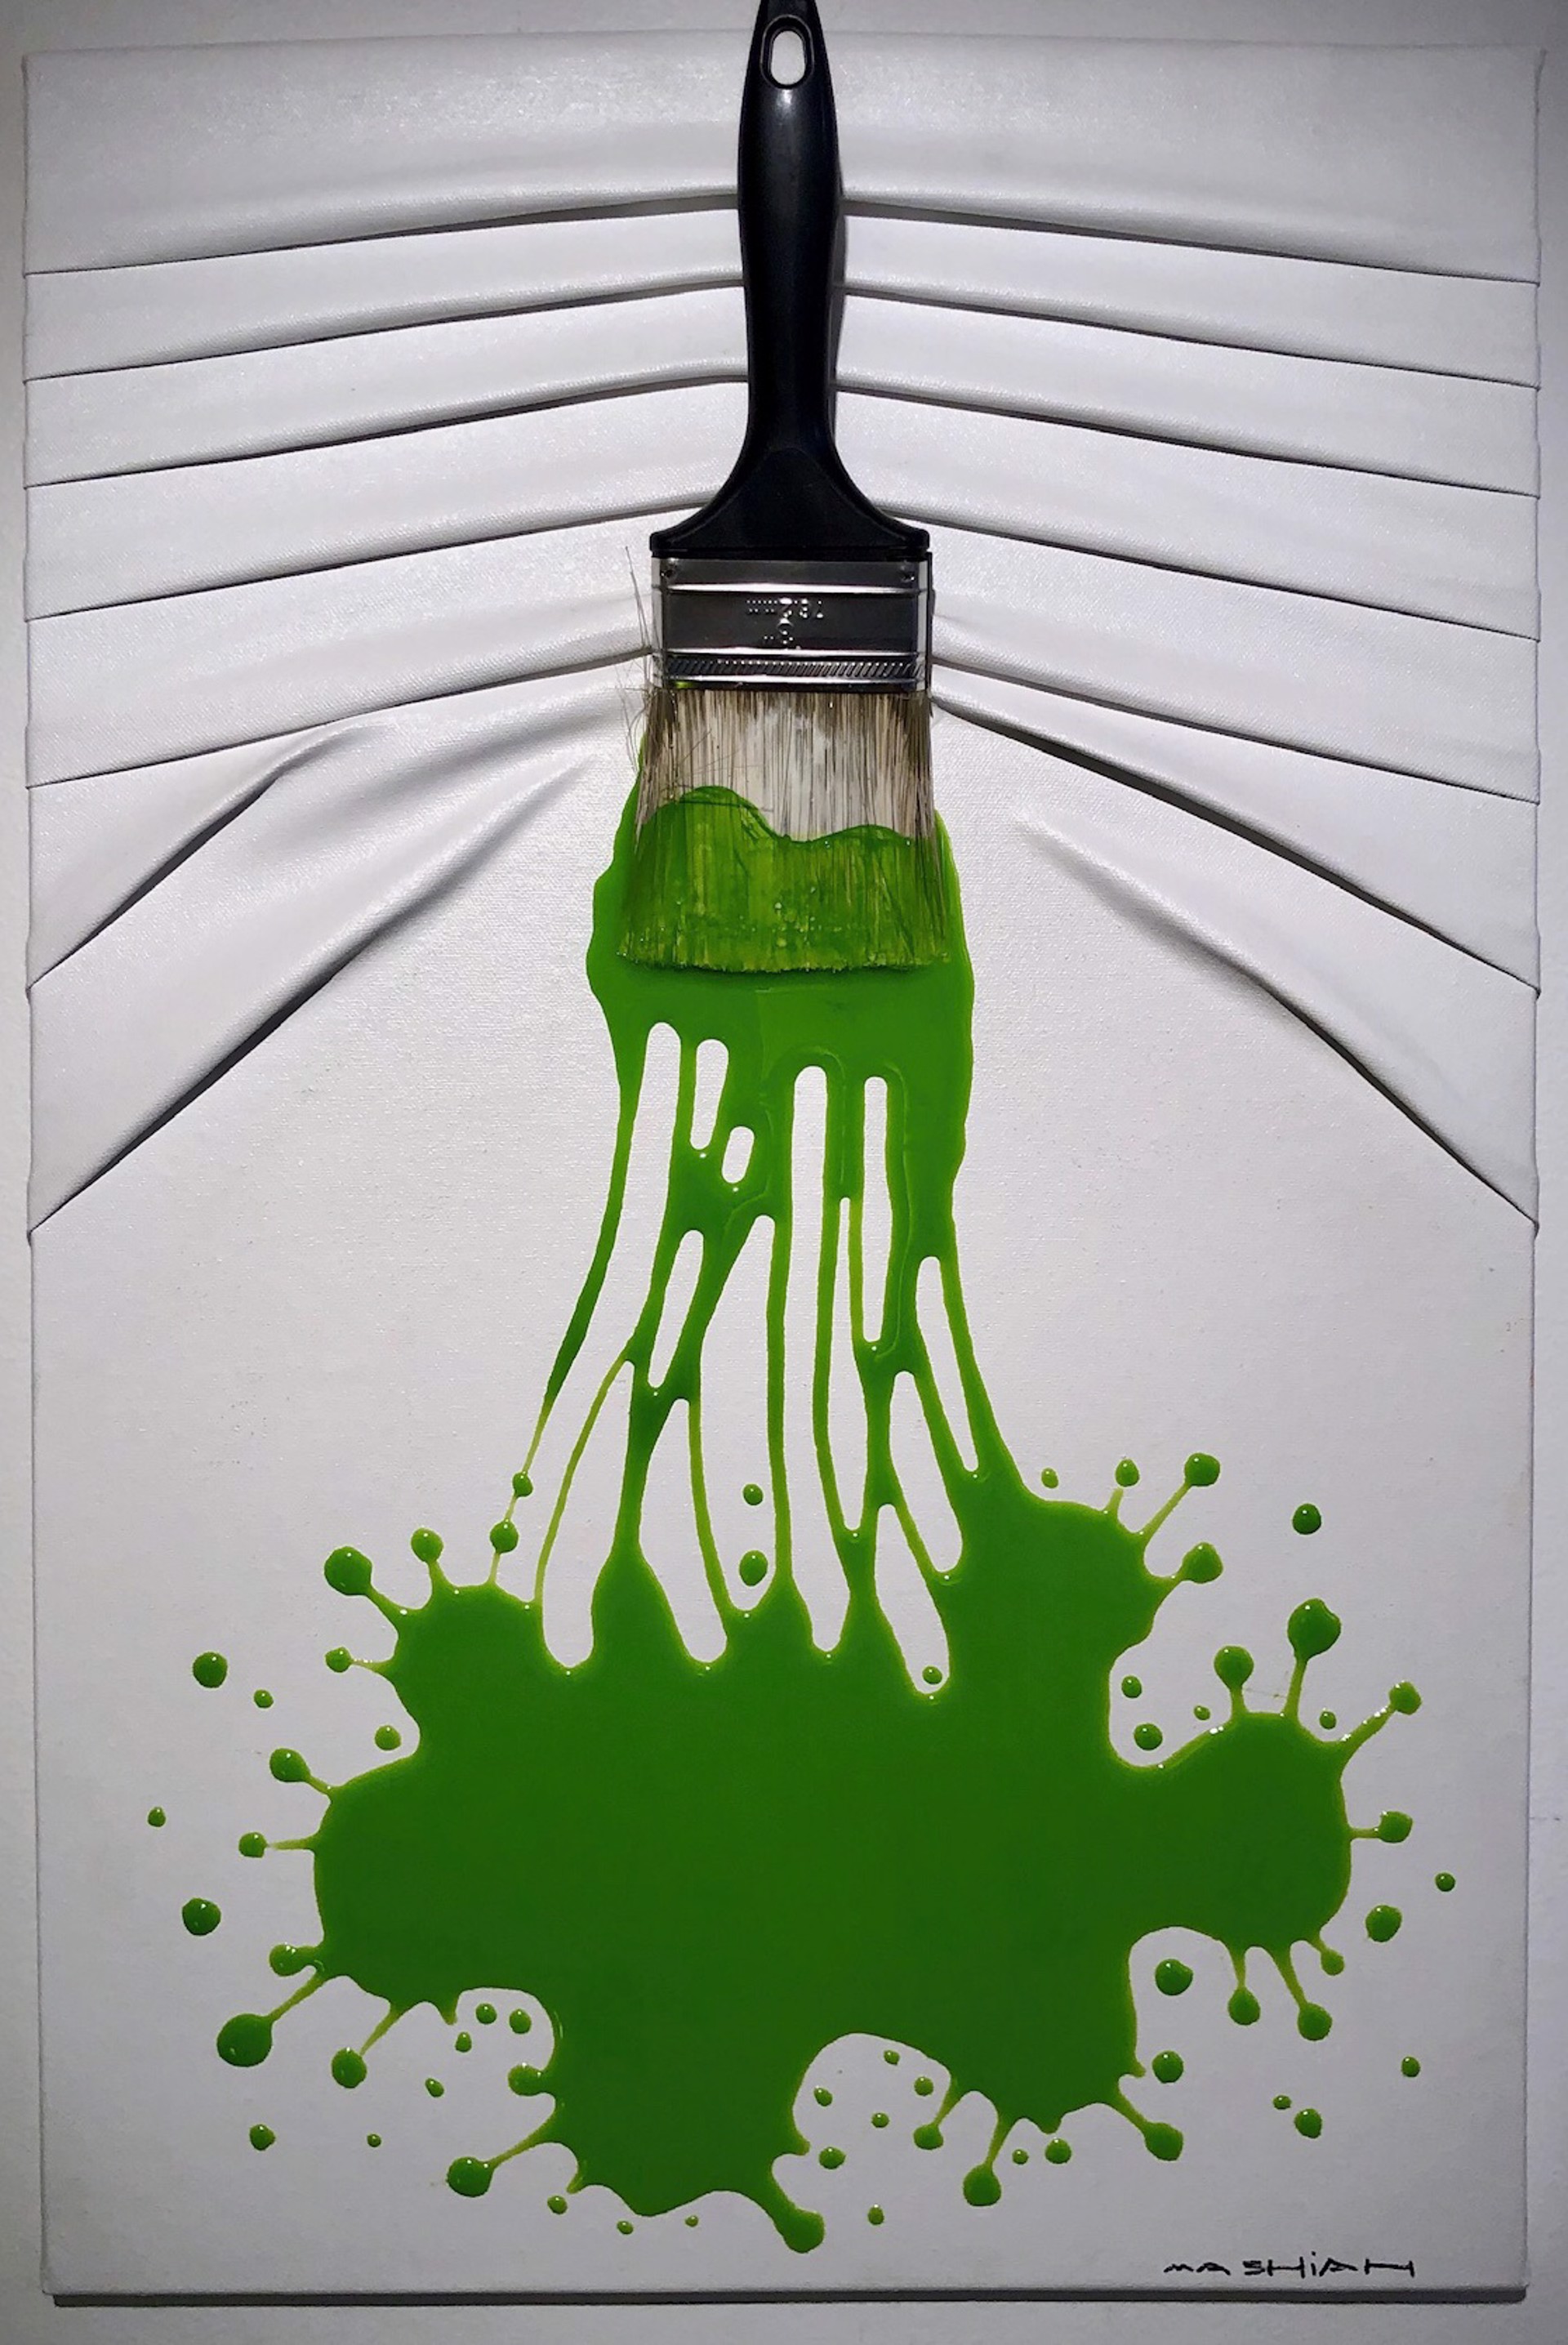 "Let's Paint" small, Green splash on White by Brushes and Rollers "Let's Paint" by Efi Mashiah